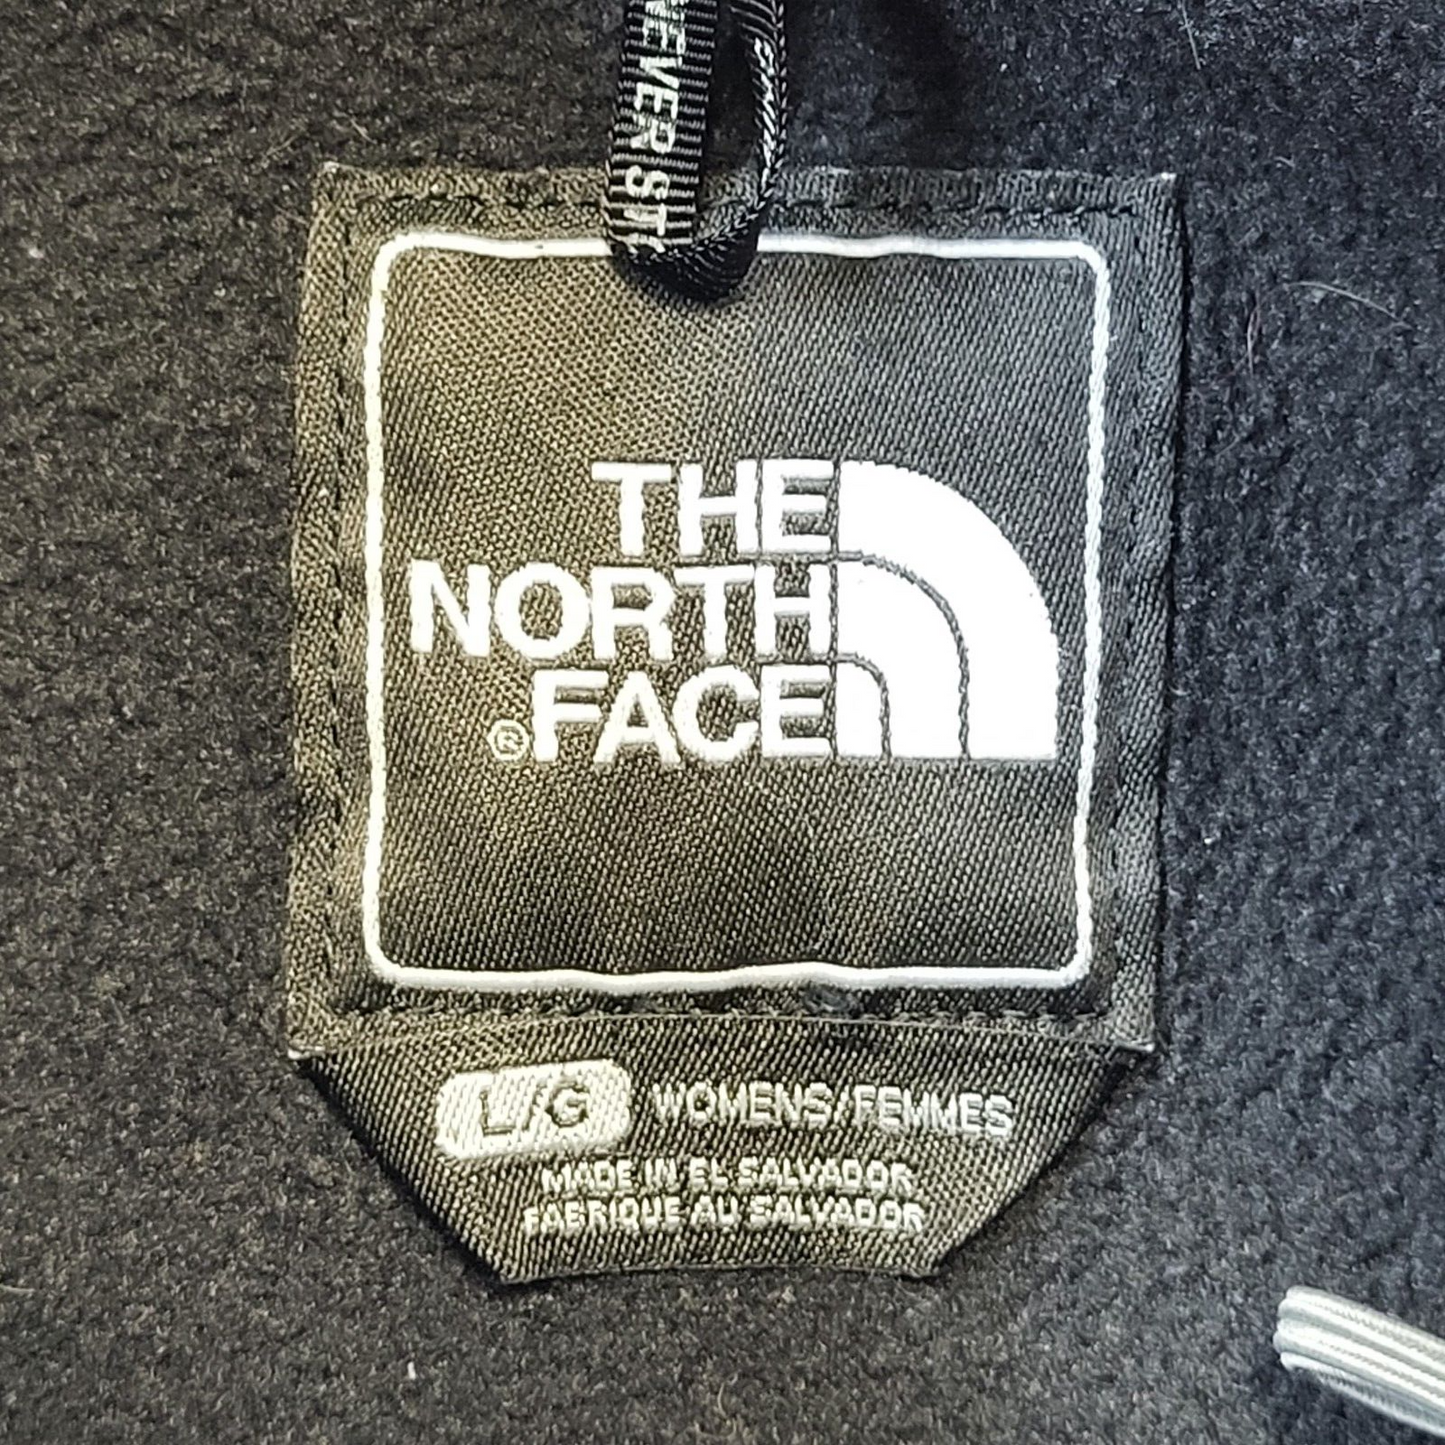 The North Face Jacket (L)